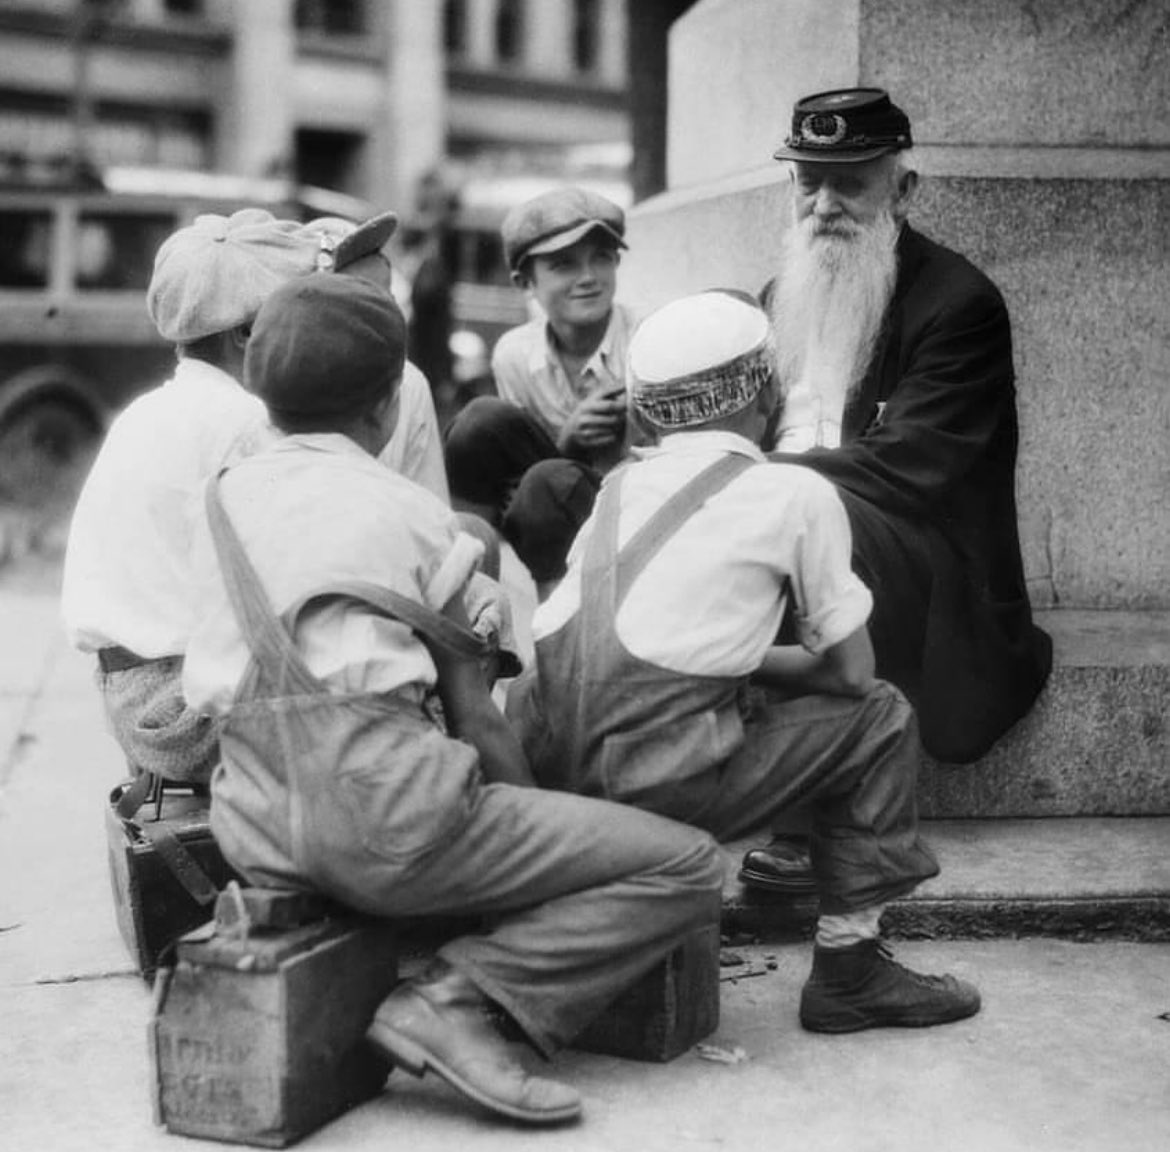 A group of shoe shine boys gather around an old Civil War veteran to listen to his war stories, 1935.

The Civil War veteran in the photograph is wearing the cap of the Grand Army of the Republic (GAR), which was the largest Union veterans' organization founded in 1866. The…